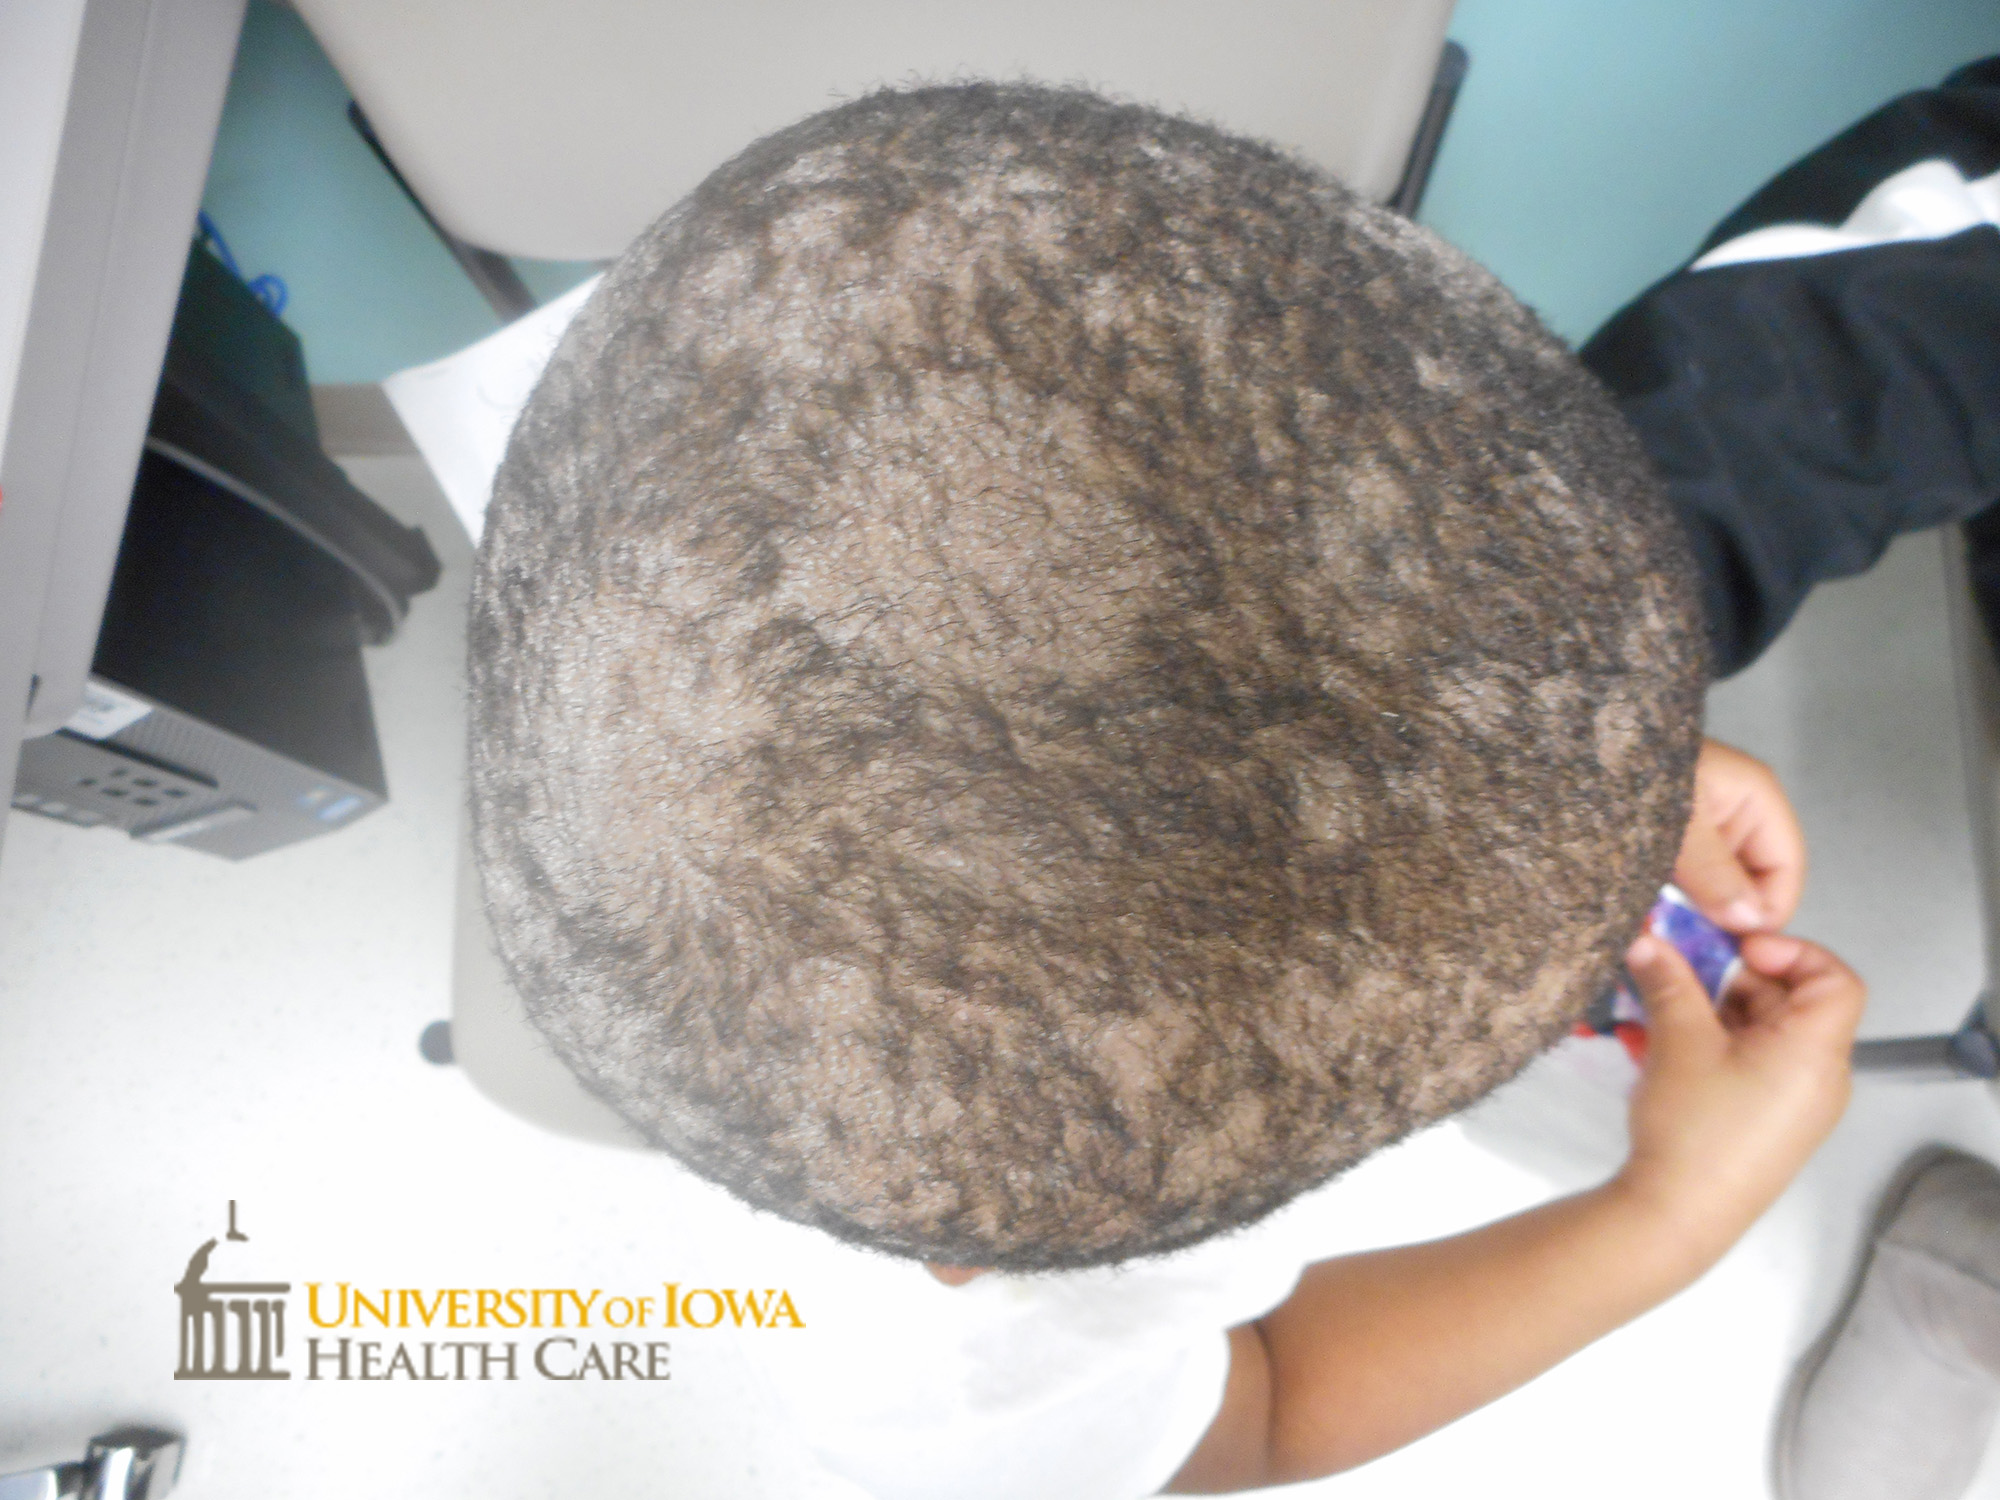 Crusted alopetic patches and surounding scaling on the scalp. (click images for higher resolution).